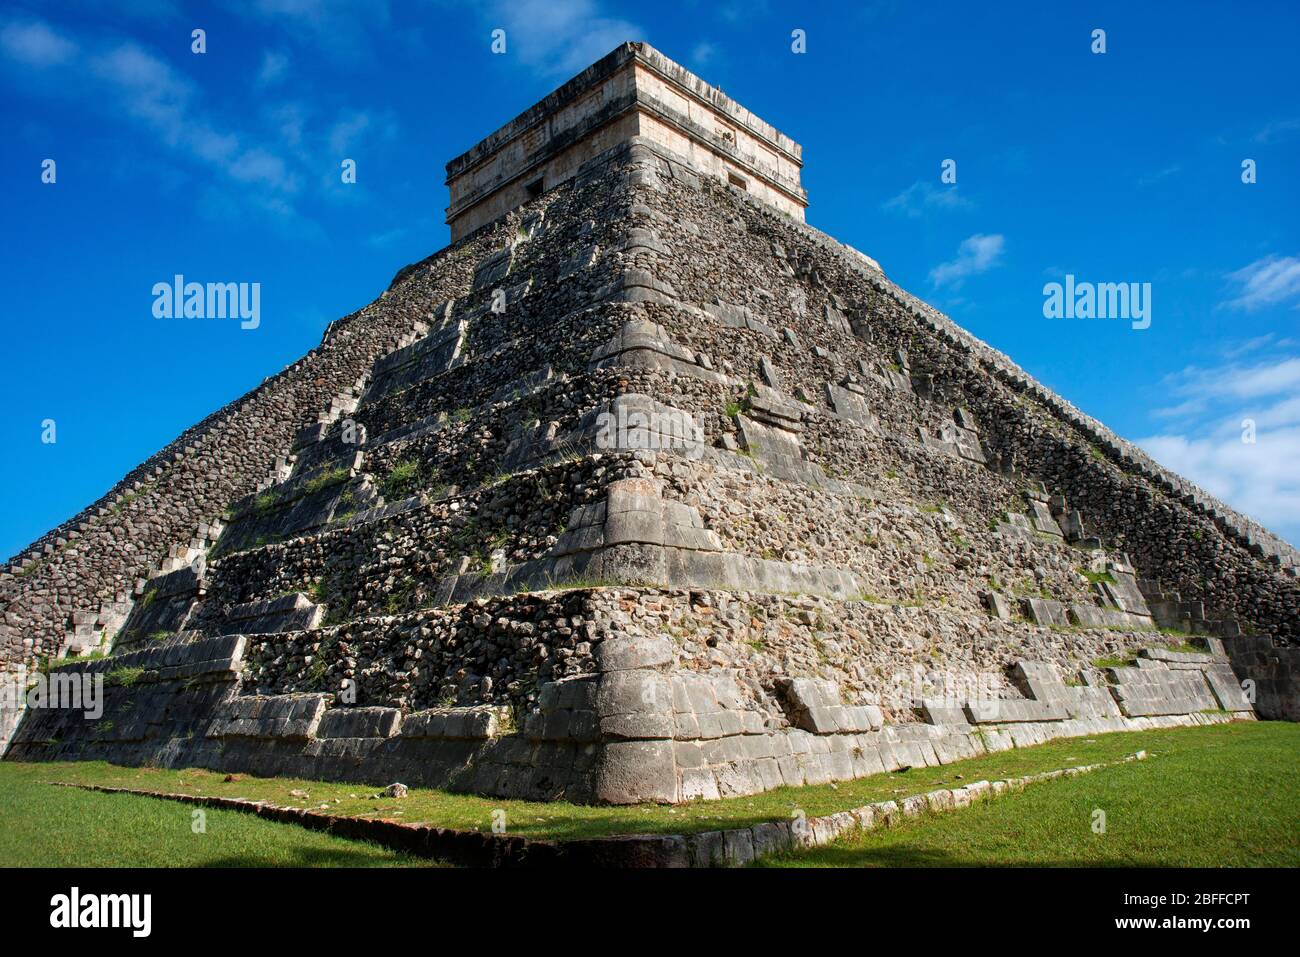 El Castillo, The Pyramid of Kukulkán, is the Most Popular Building in the UNESCO Mayan Ruin of Chichen Itza Archaeological Site Yucatan Peninsula, Qui Stock Photo